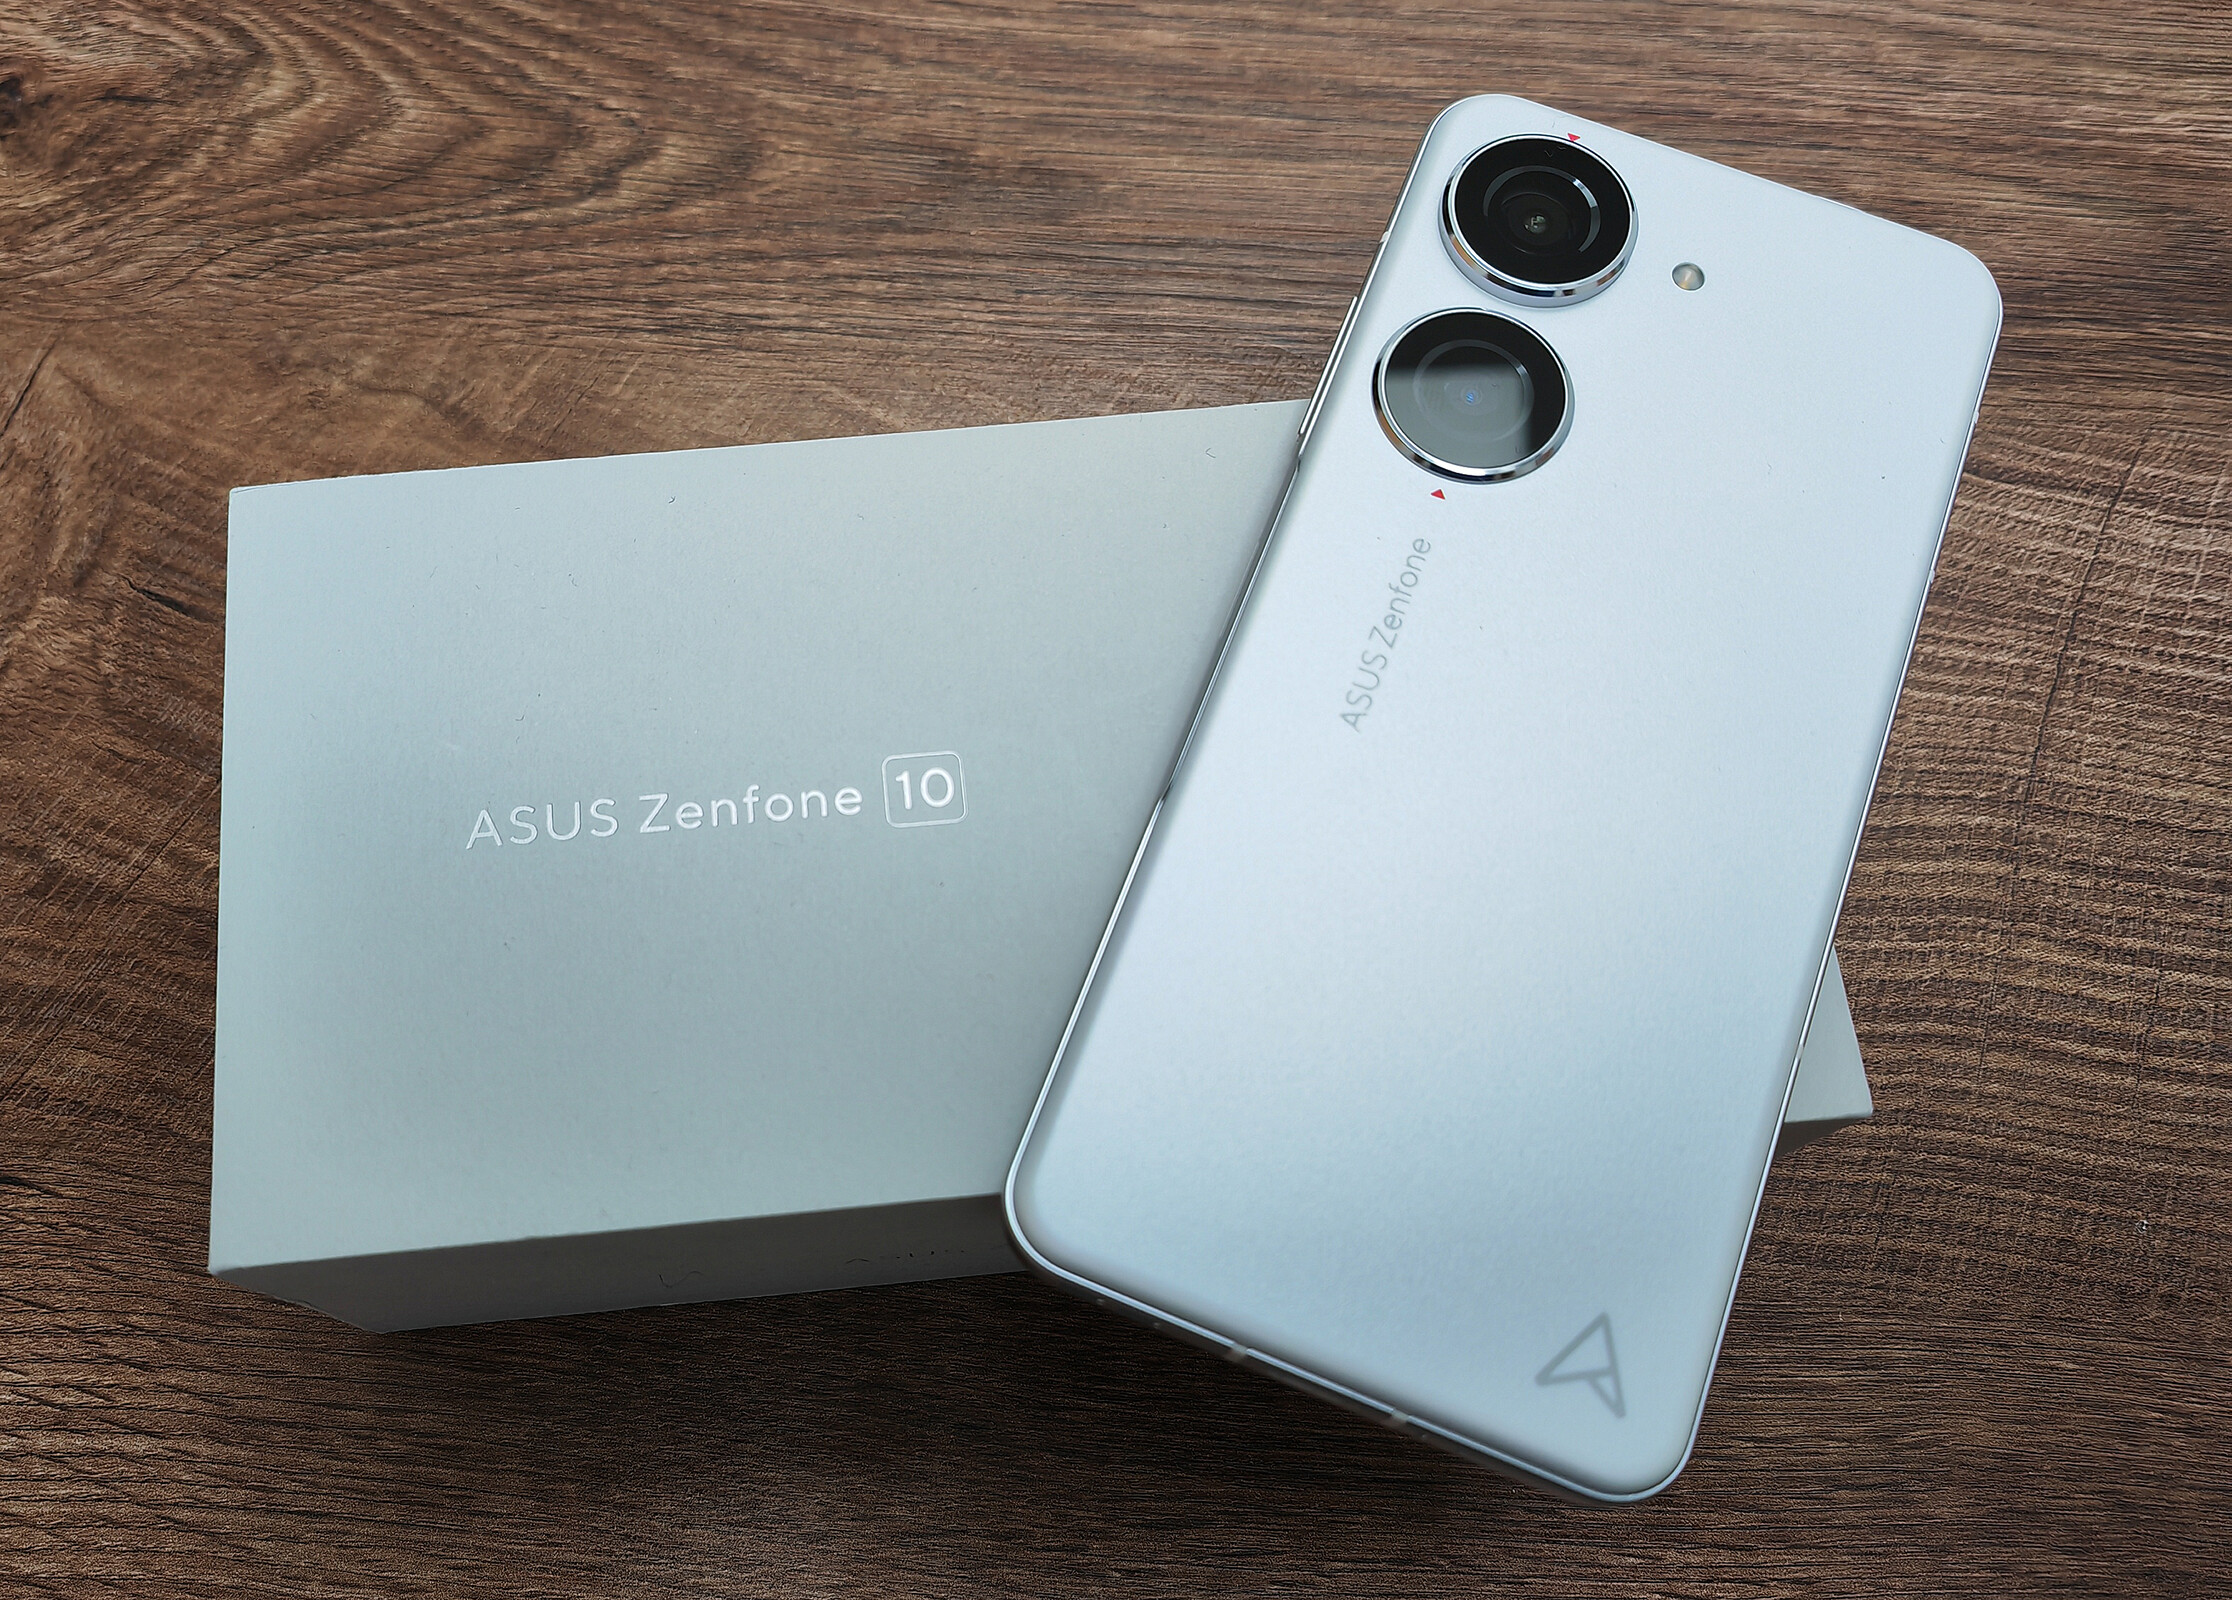 Asus Zenfone 10: a compact smartphone with compromises -   News